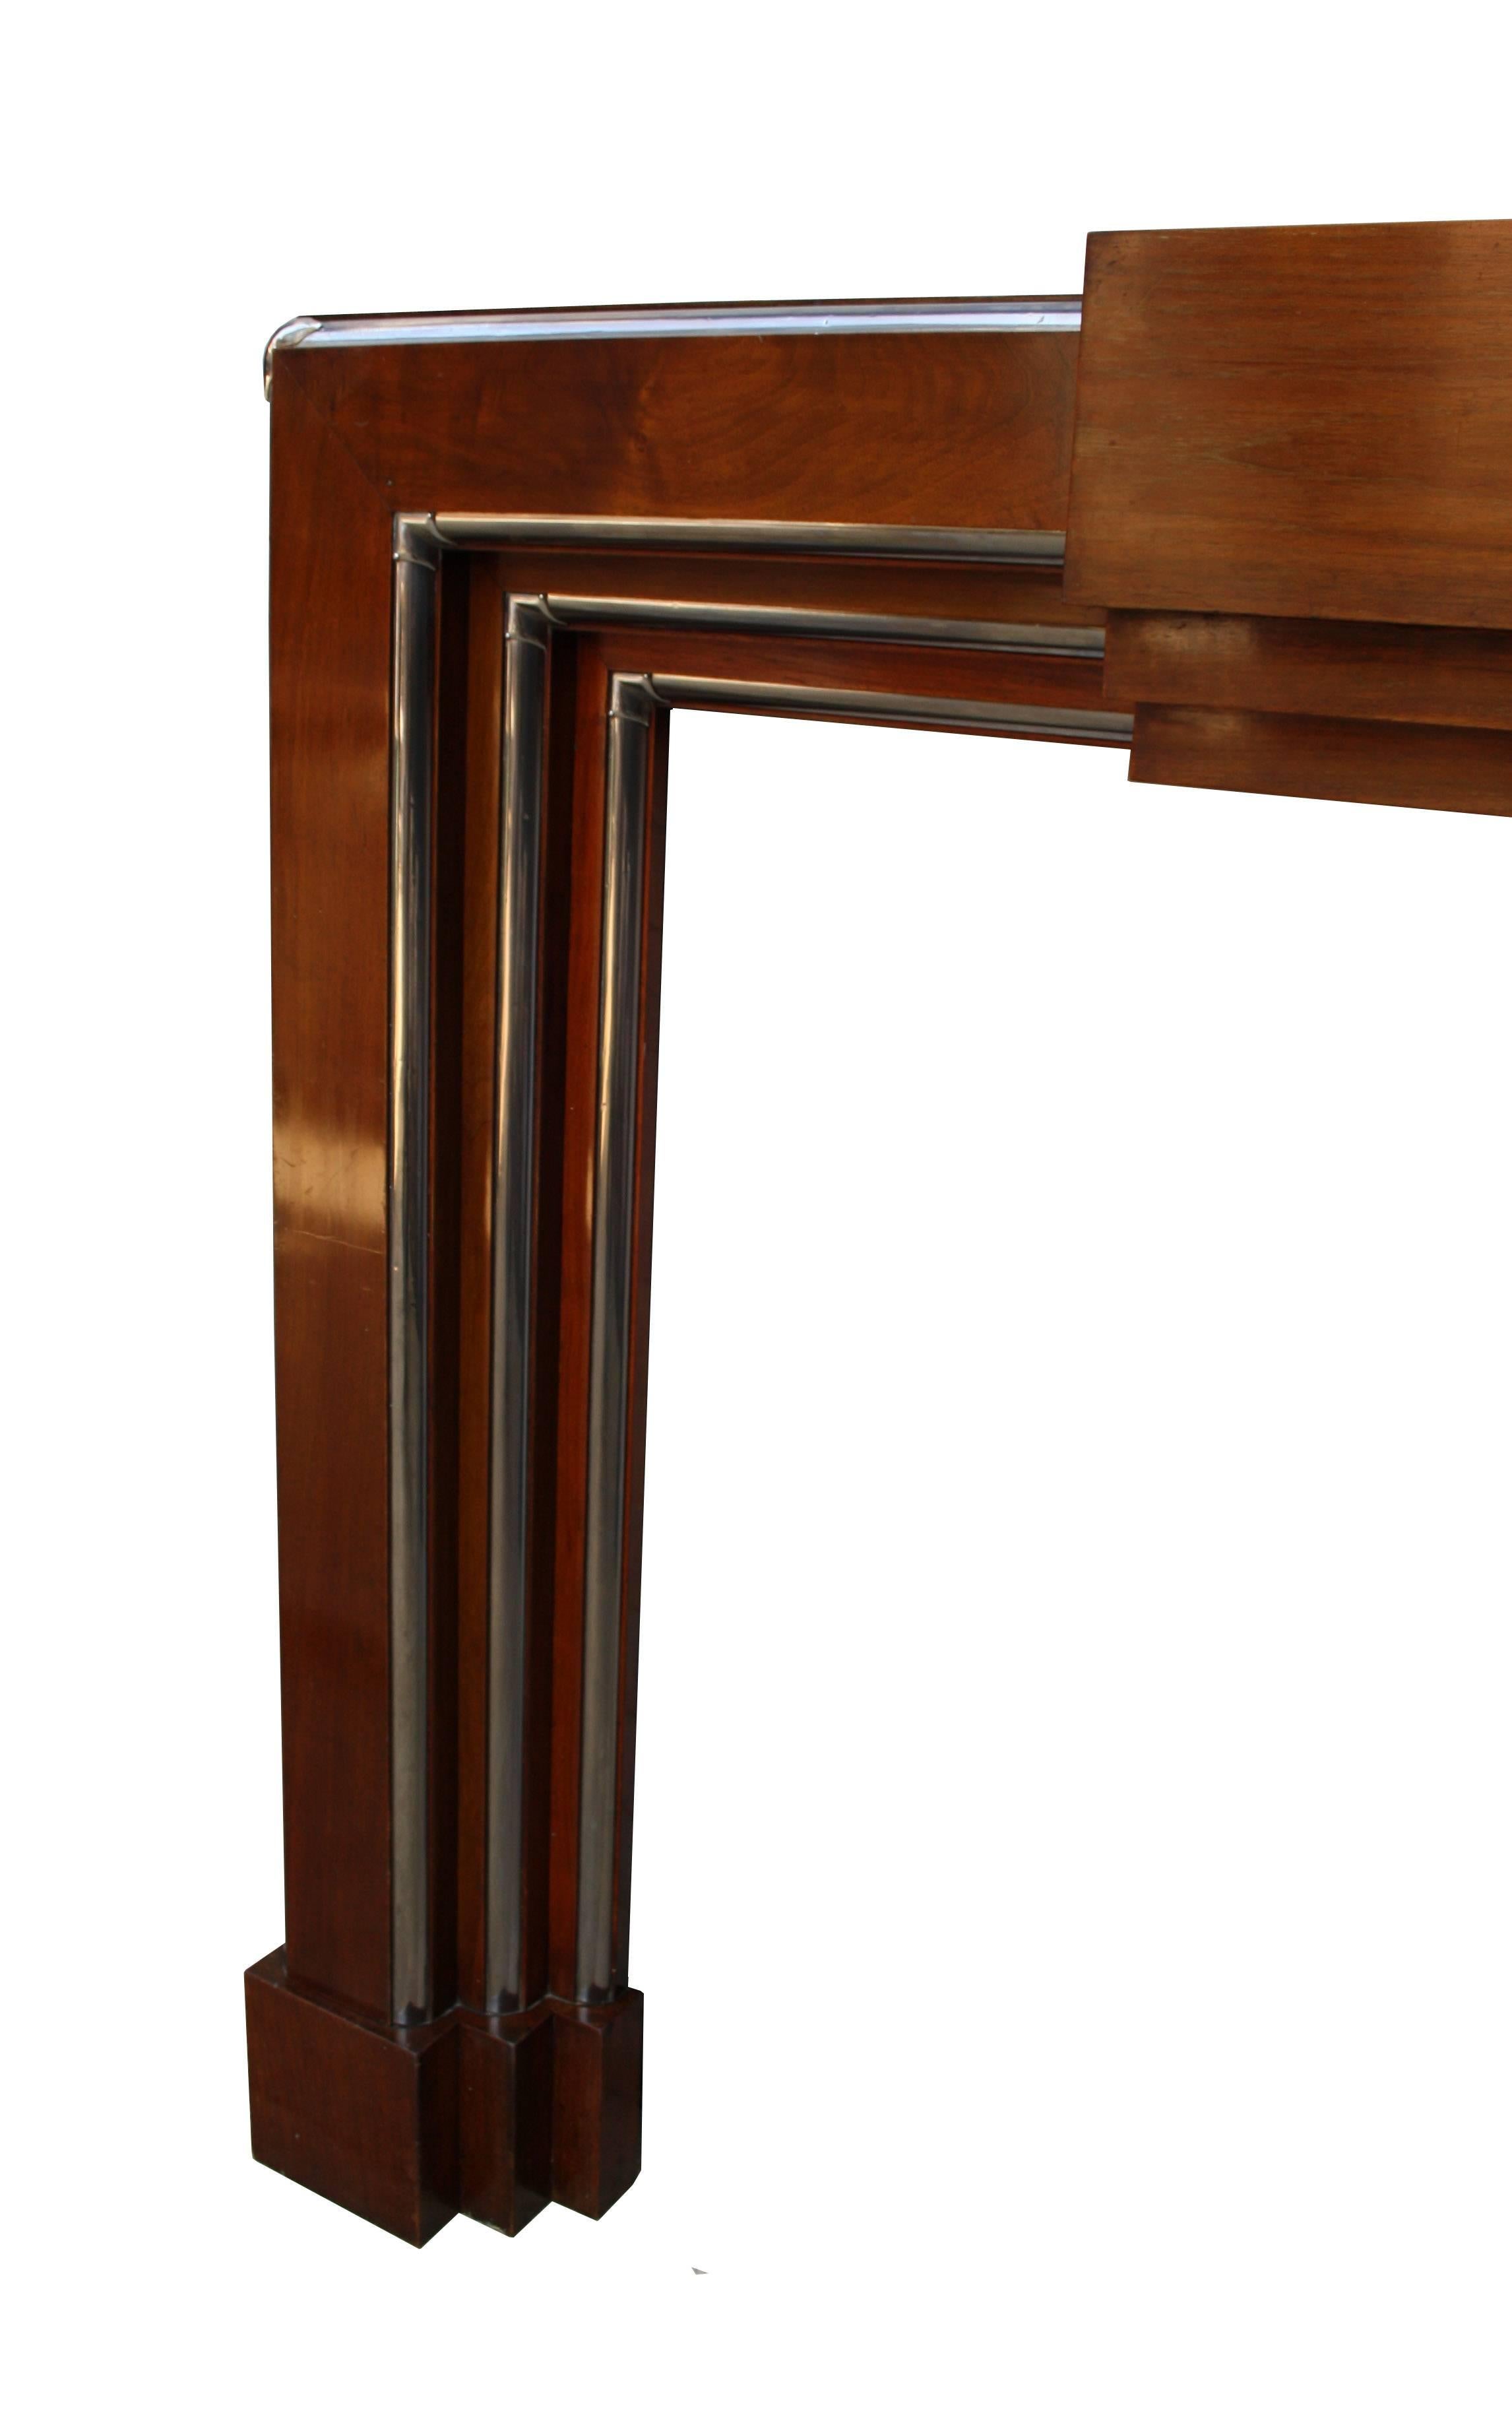 Rare Art Deco walnut and chrome fire surround, circa 1935. Opening height 100 x width 100 cm (39.5 x 39.5 inches).